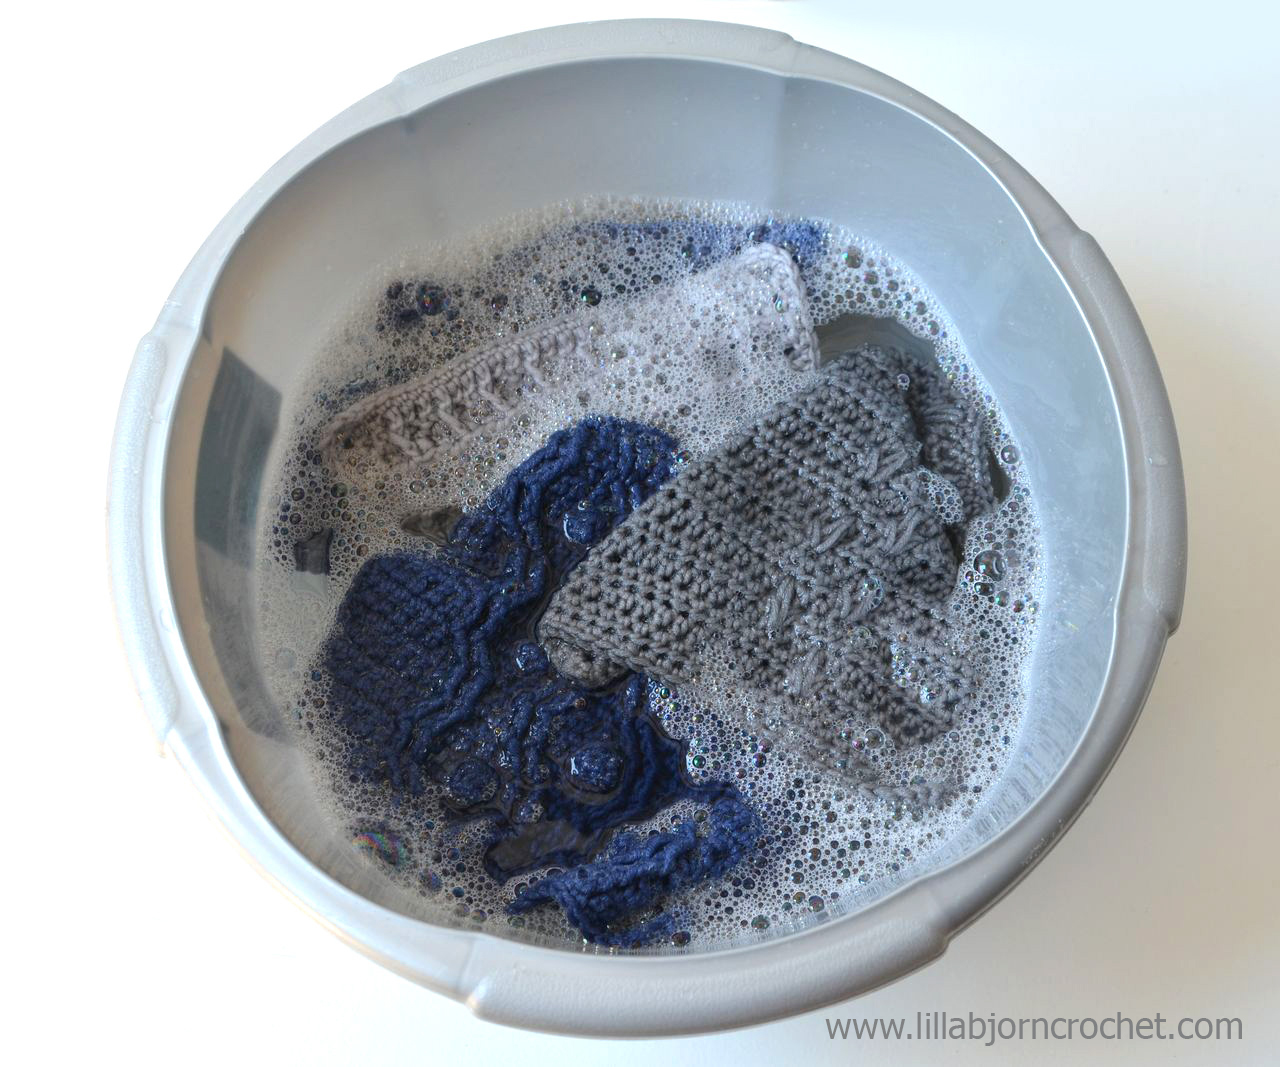 Eucalan is a natural concentrate which helps to refill wool (and other natural yarns) with Lanolin. Review and test by Lilla Bjorn Crochetilla 